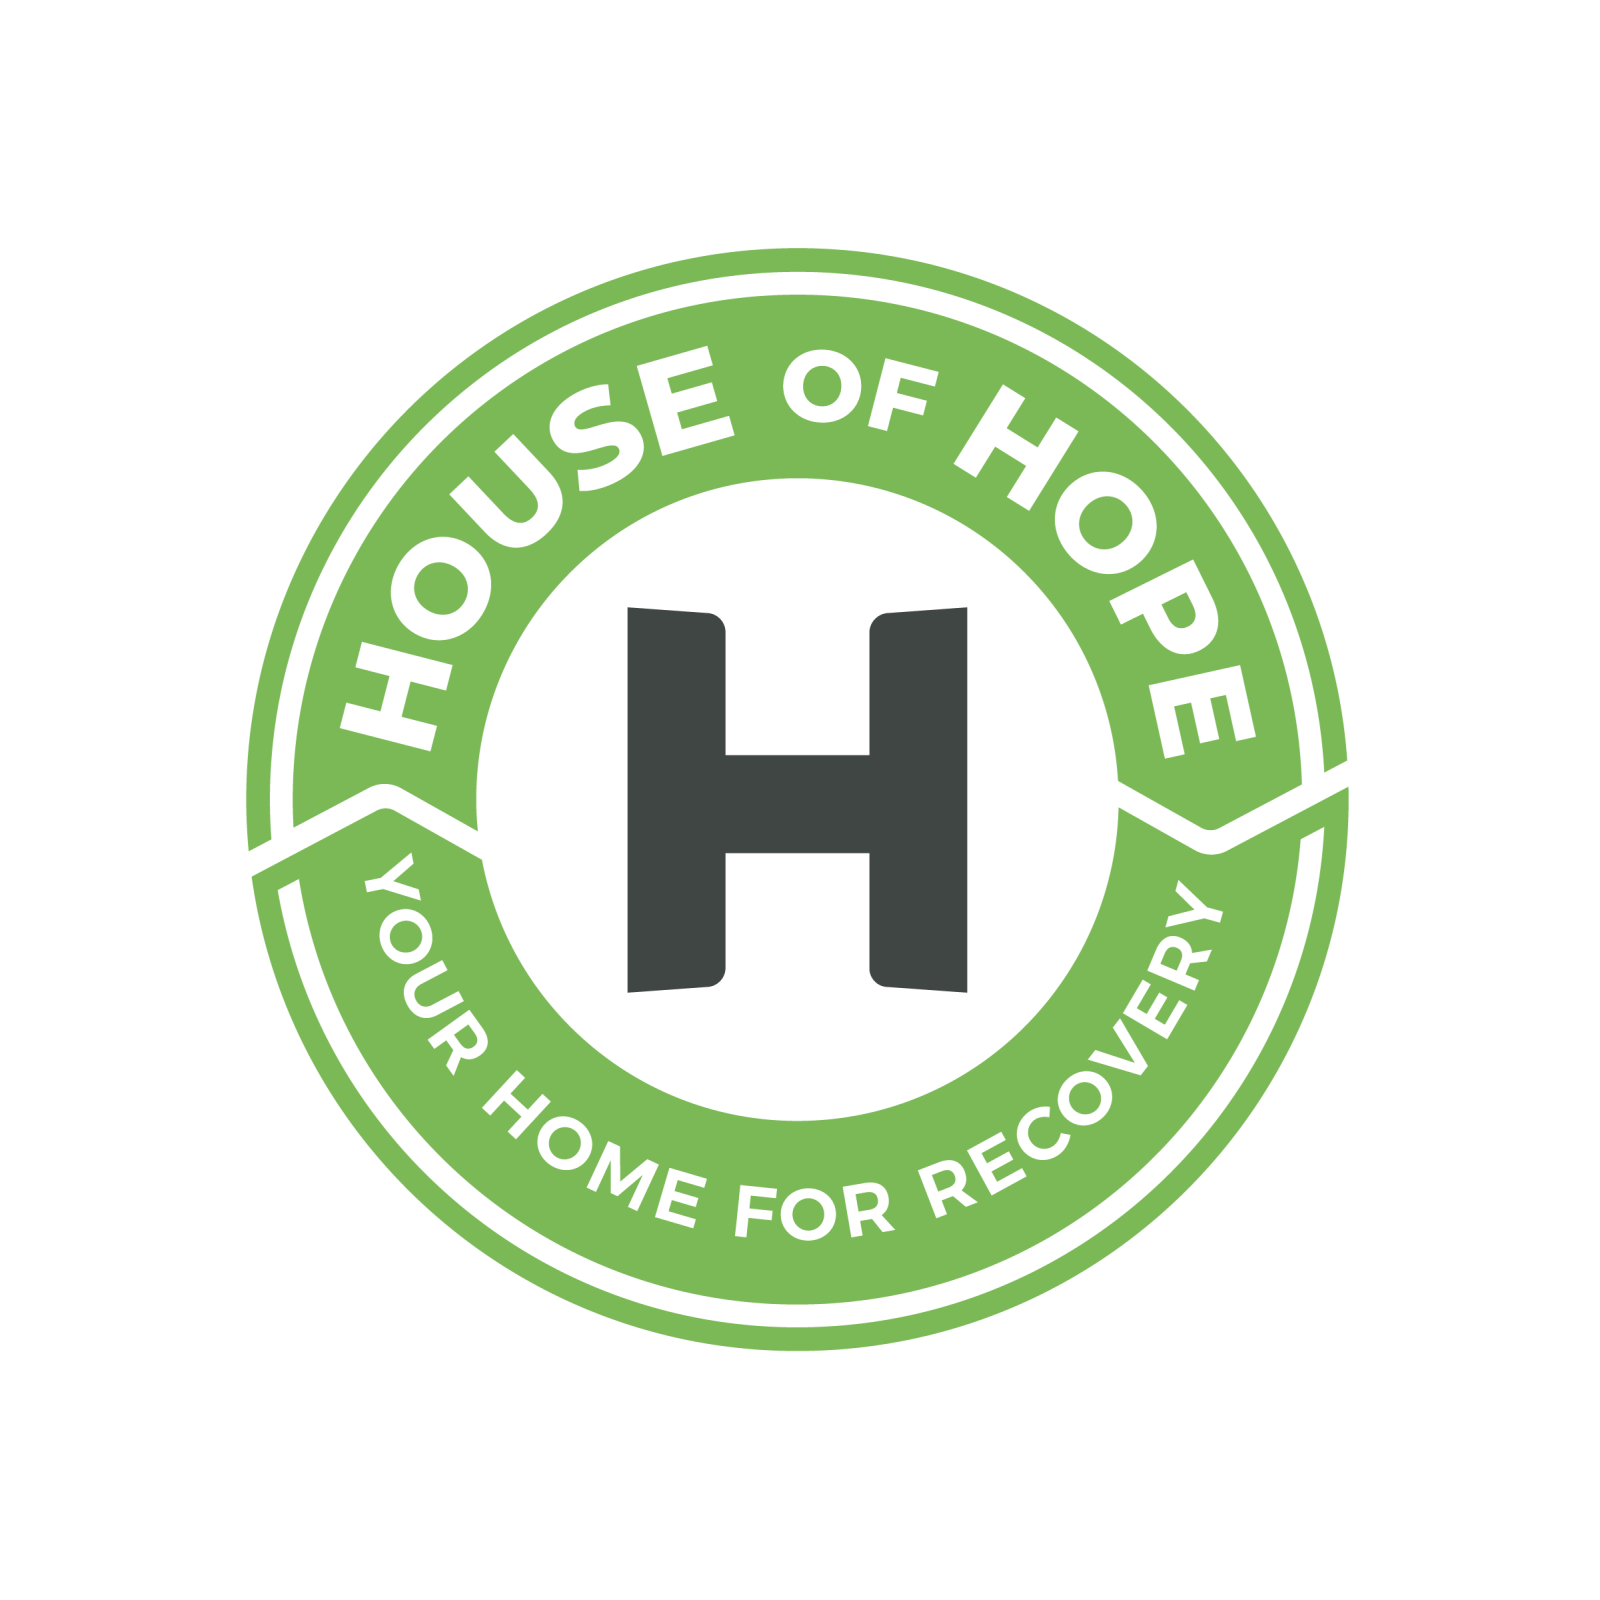 House of Hope for Recovery